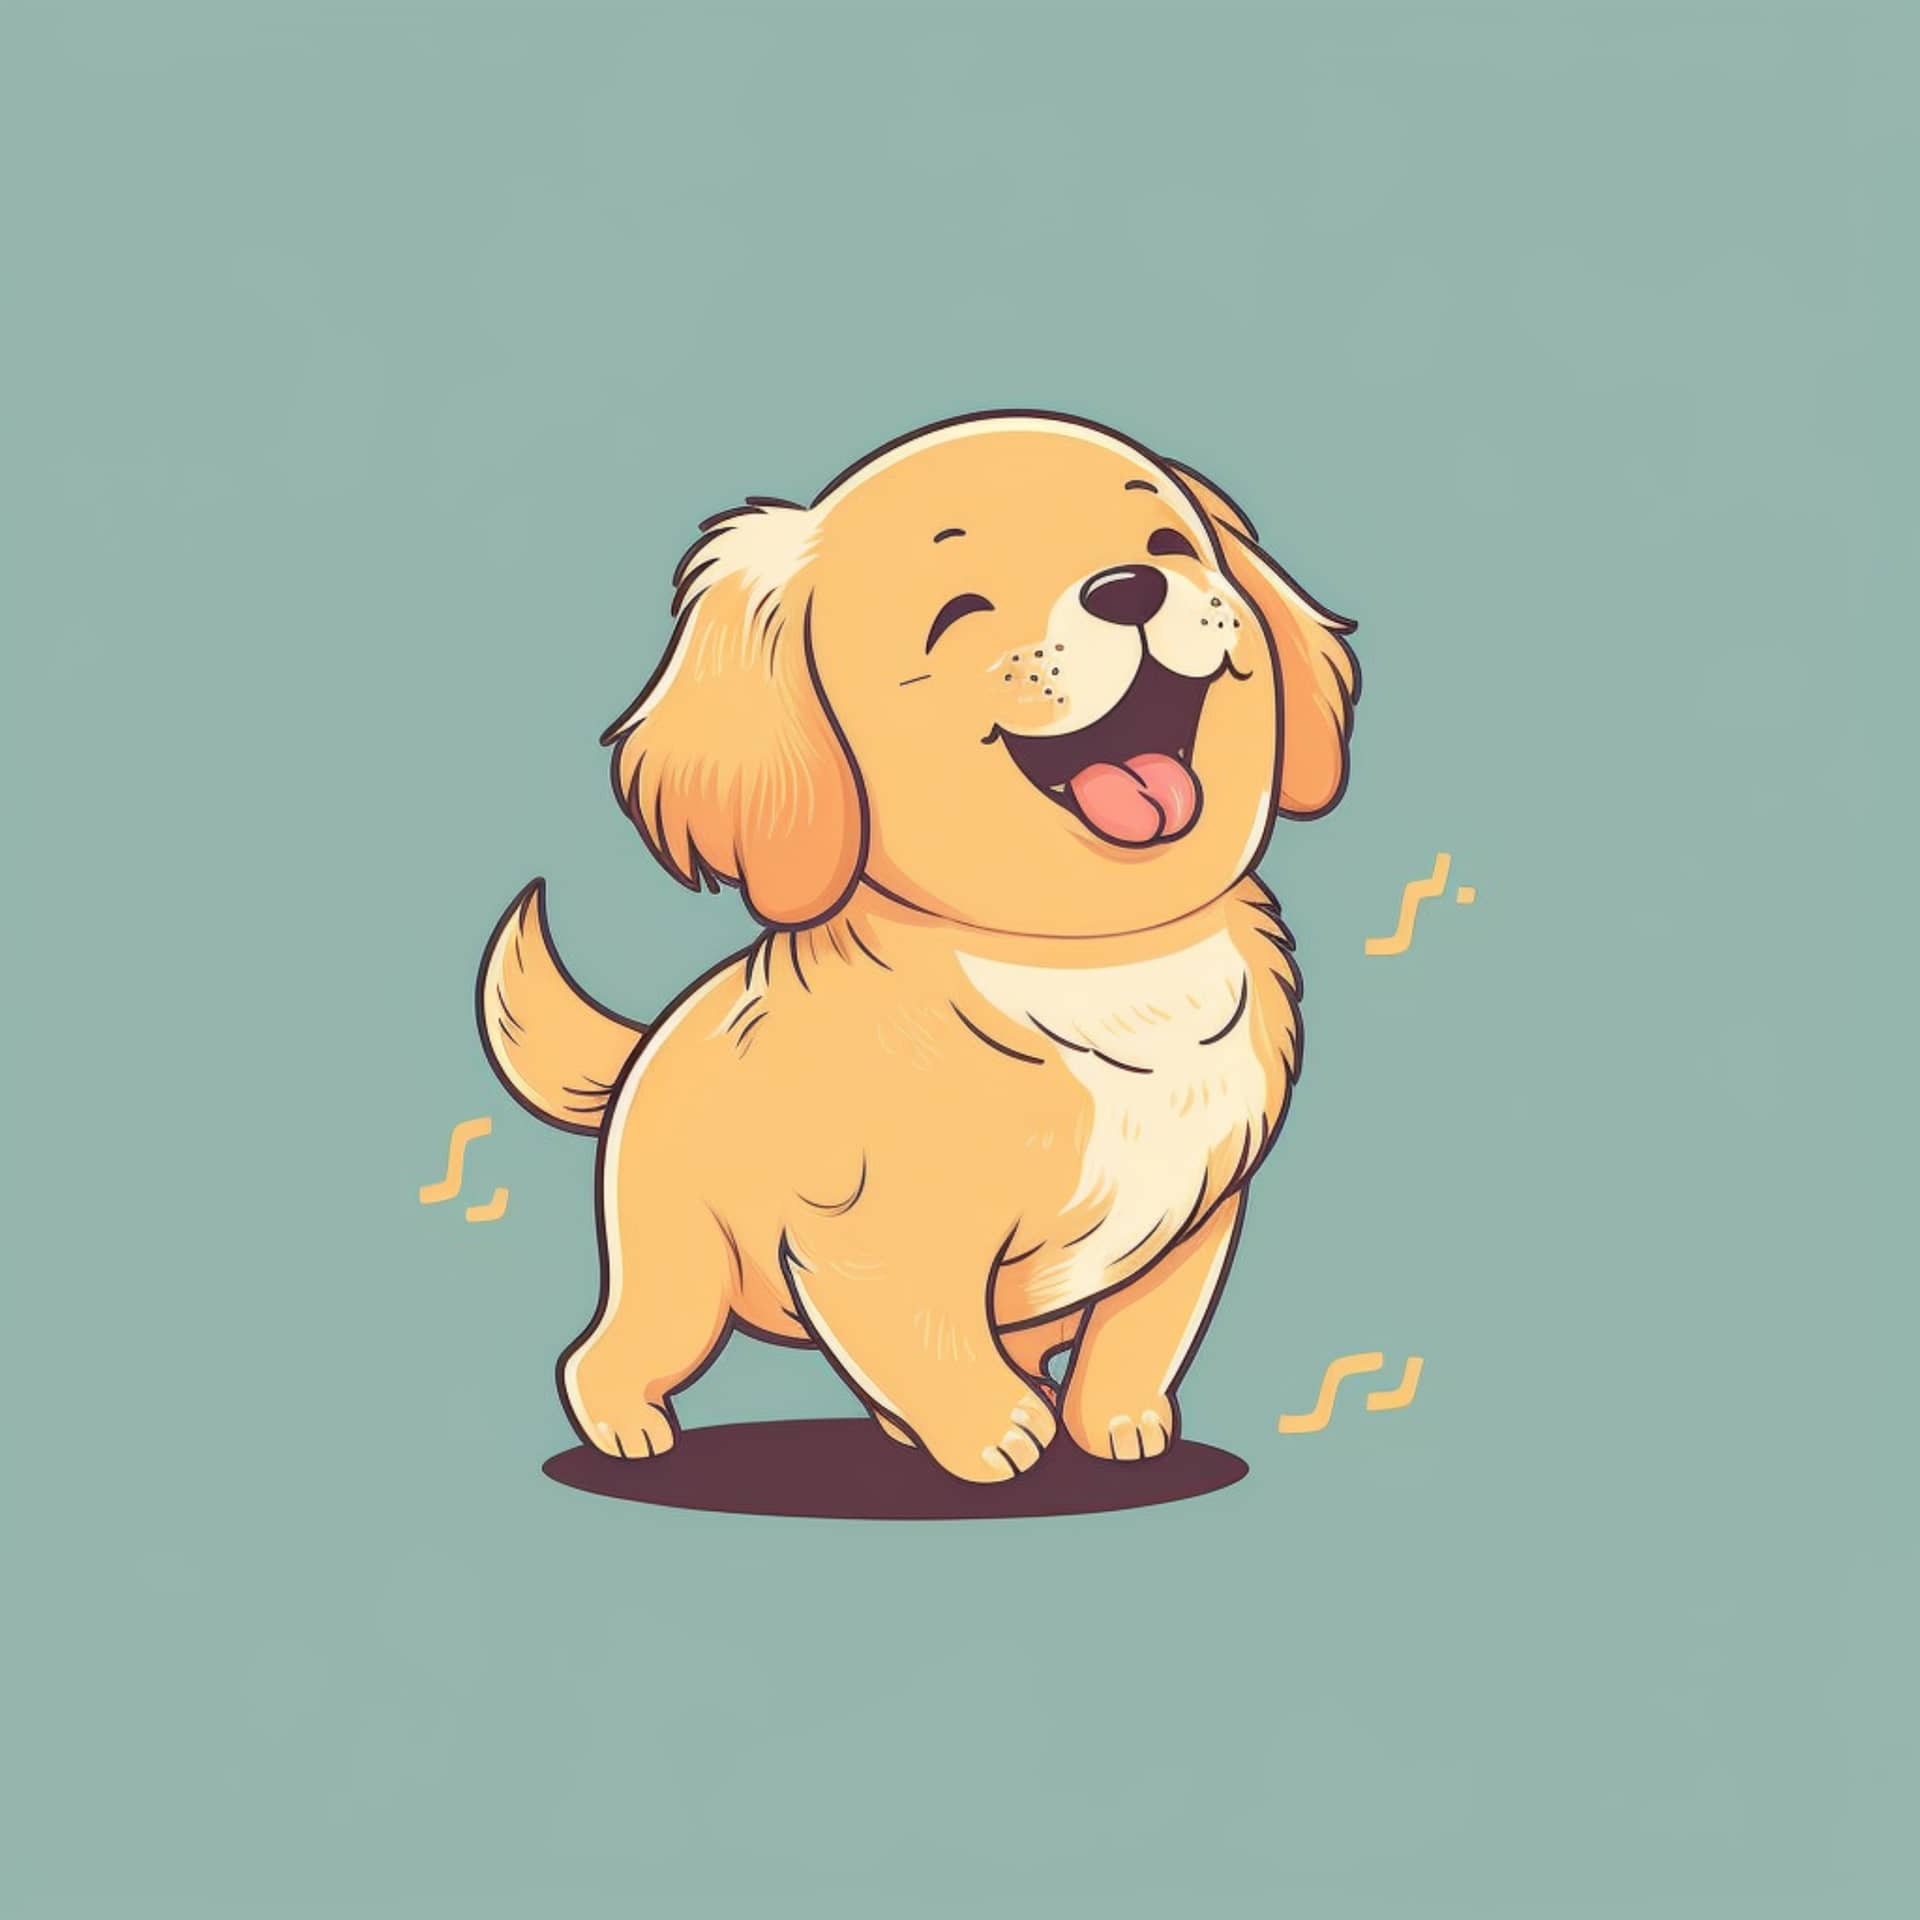 Cute dog cartoon profile pictures illustration intriguing image